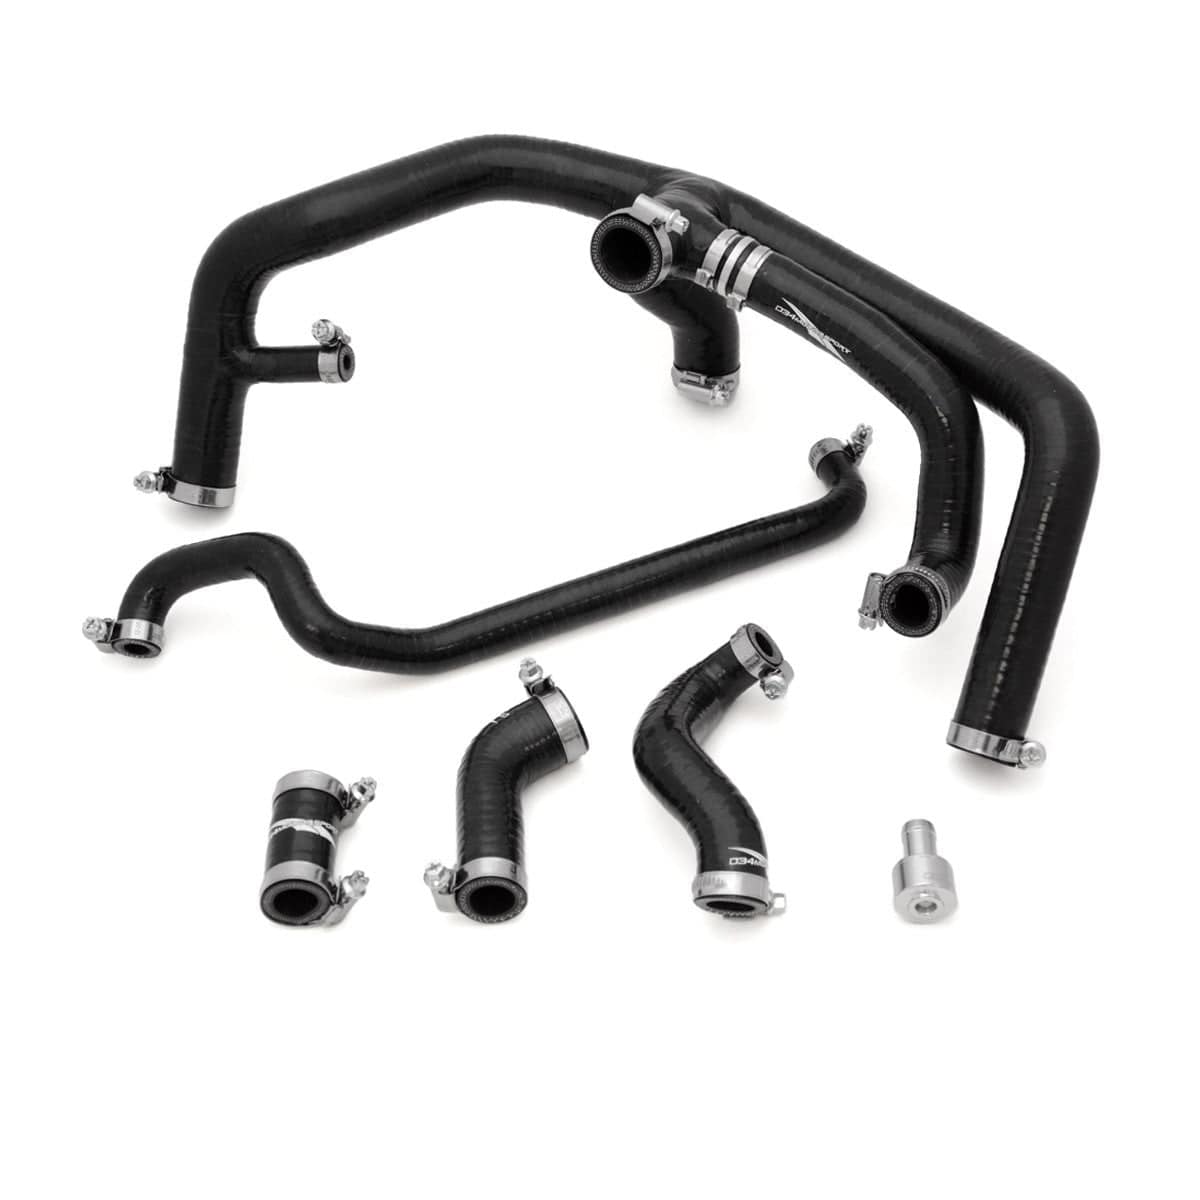 034Motorsport Silicone Breather Hose Kit, B5 Audi S4 & C5 Audi A6 2.7T, Spider Hose Replacement - ML Performance